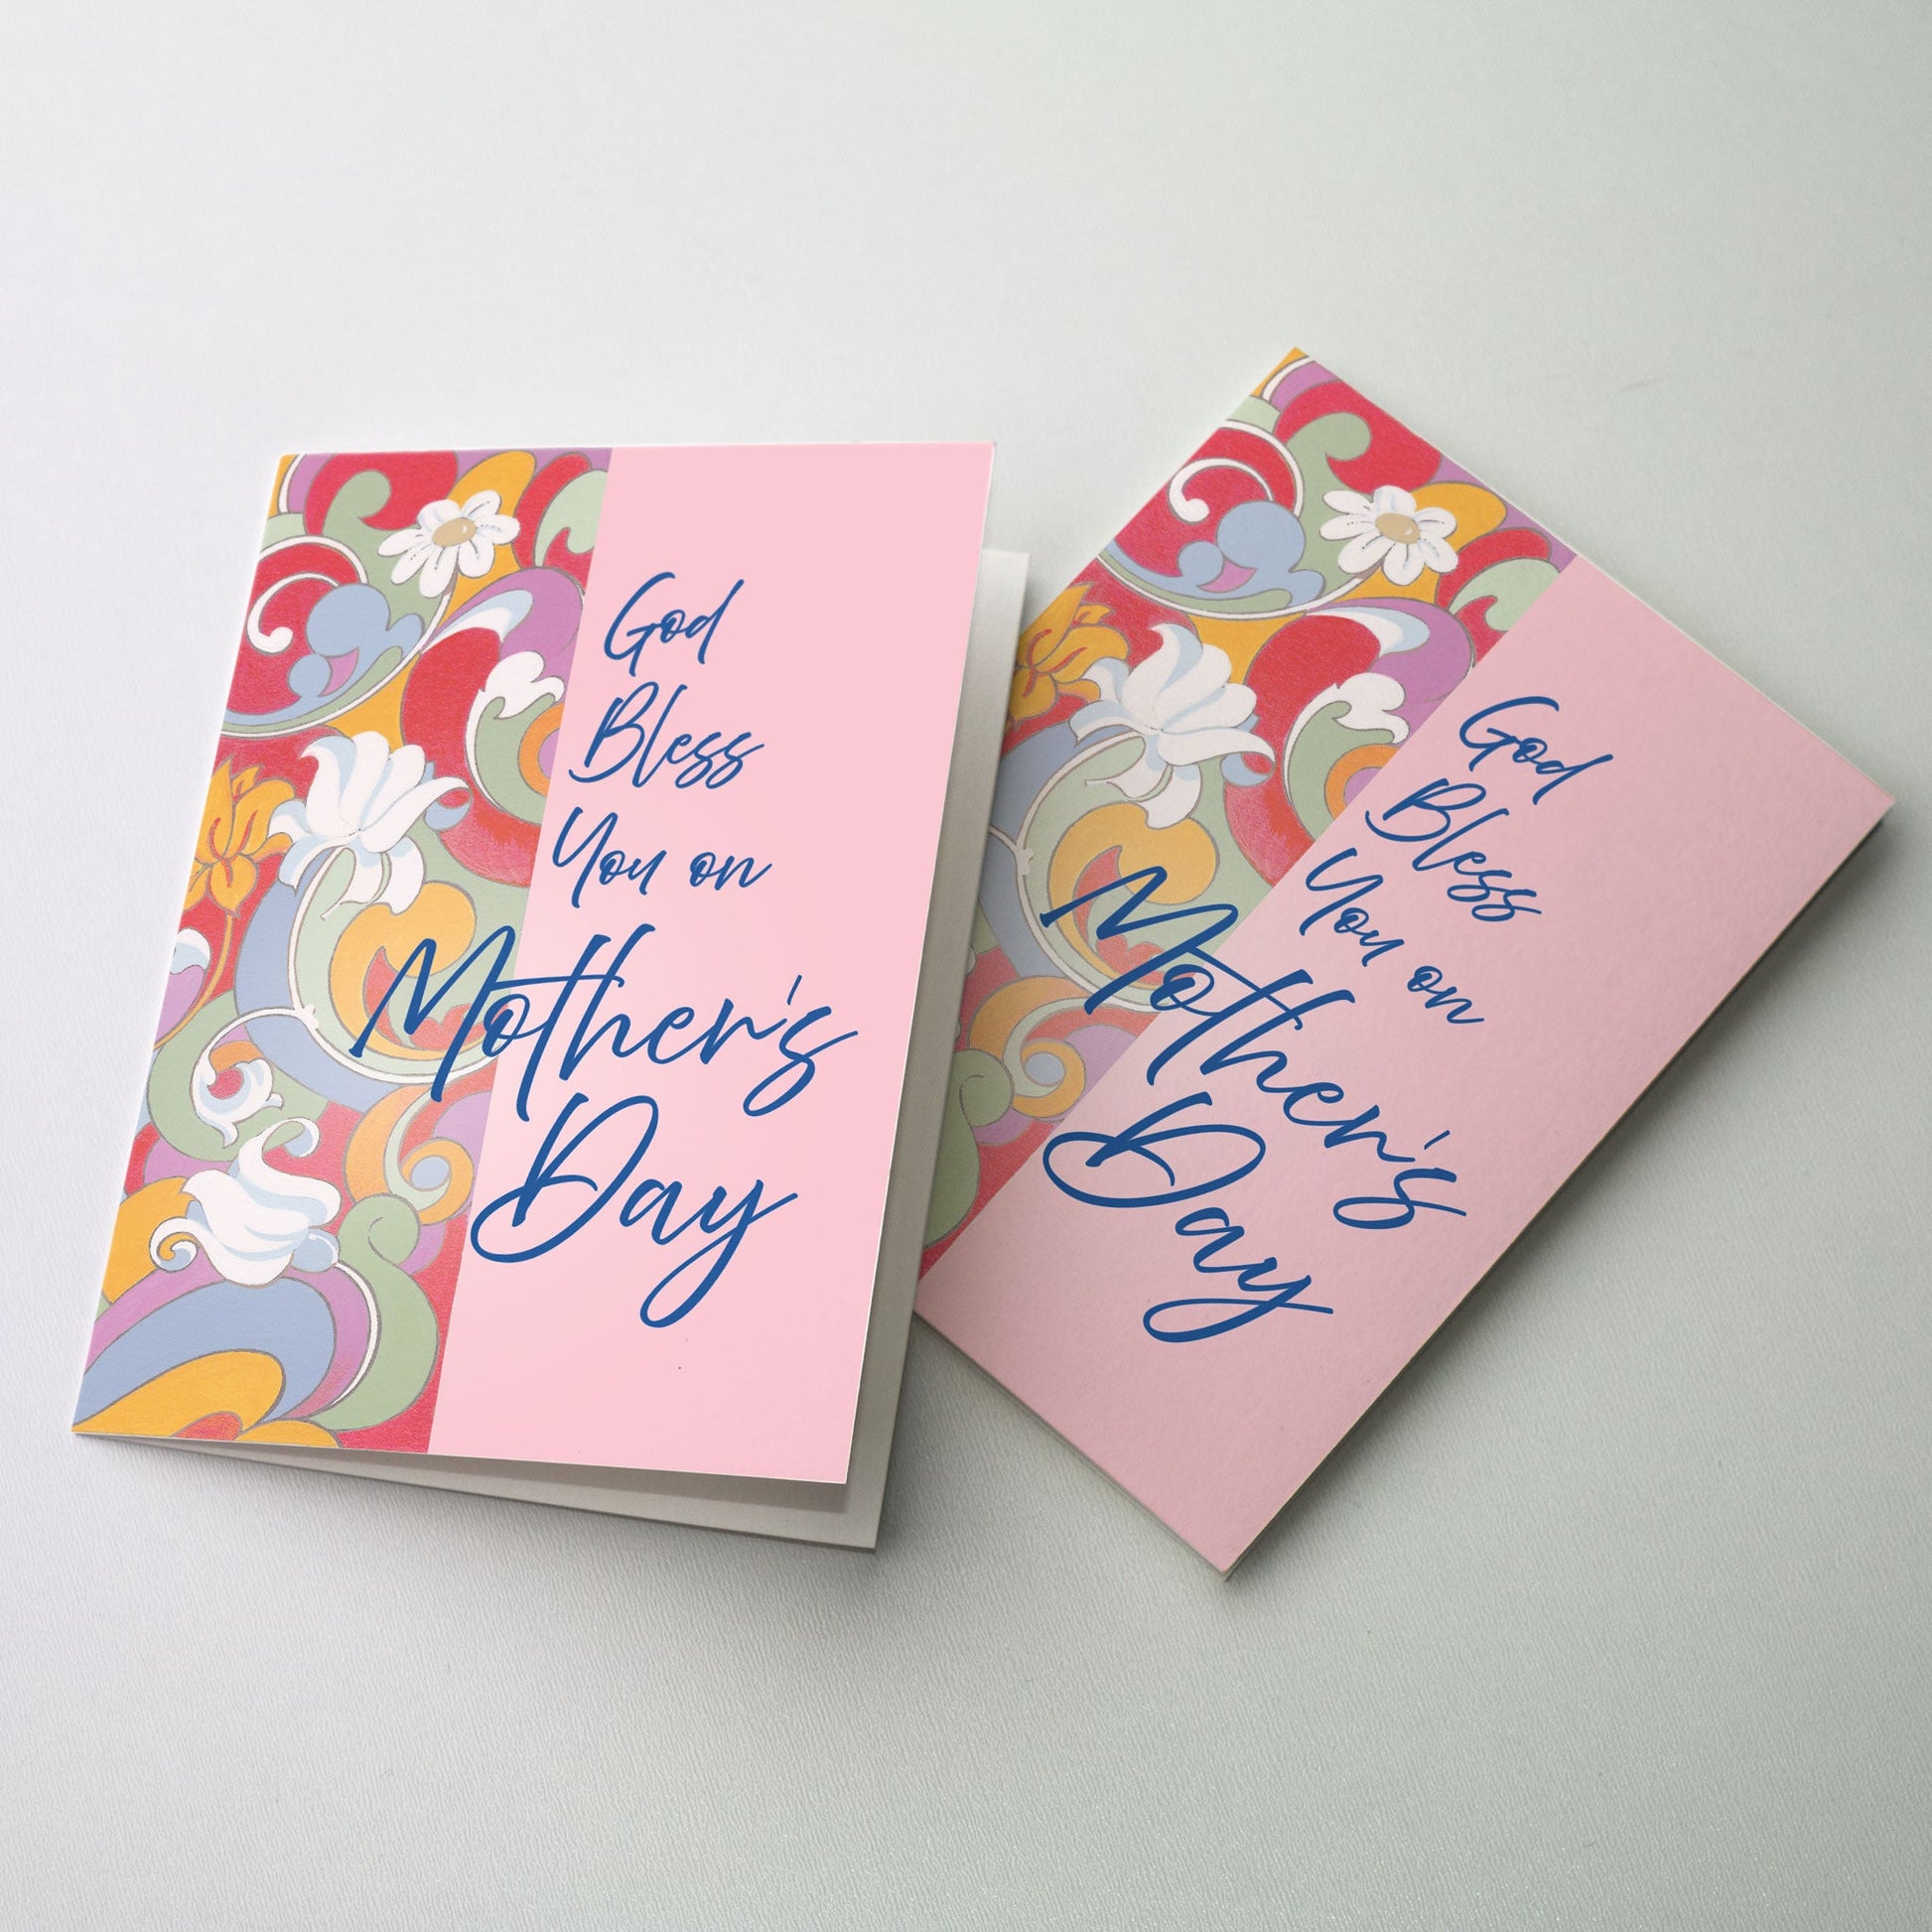 Wide banner of flower prints upon soft pink ground with title script in blue filling the right side of cover